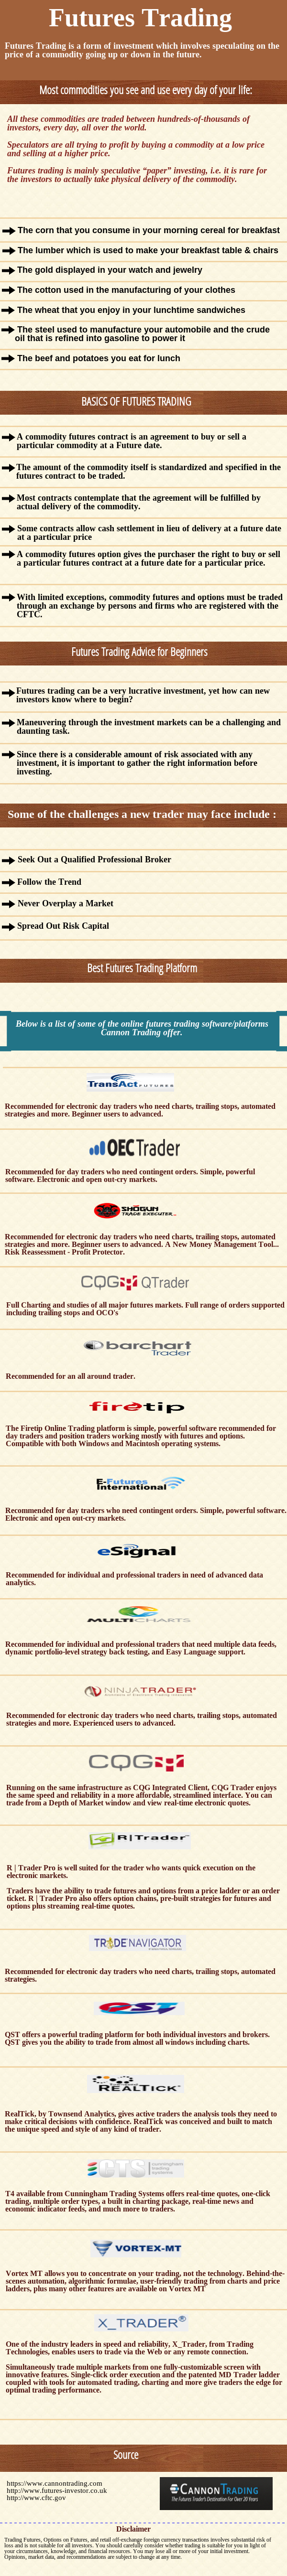 Beginner's Guide To Trading Futures - Infographic by Cannon Trading